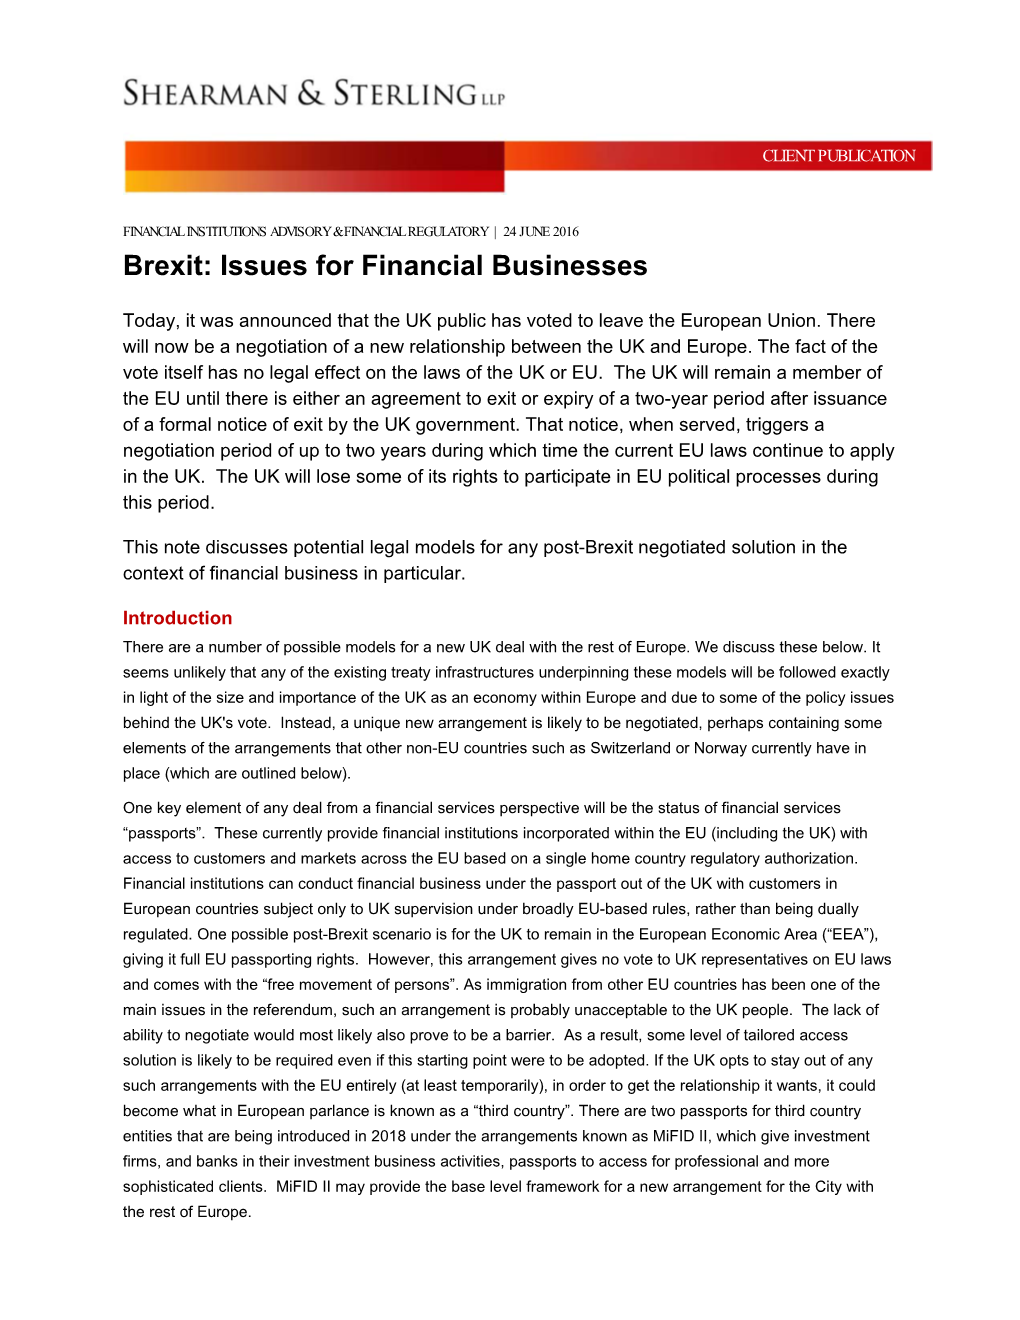 Brexit: Issues for Financial Businesses